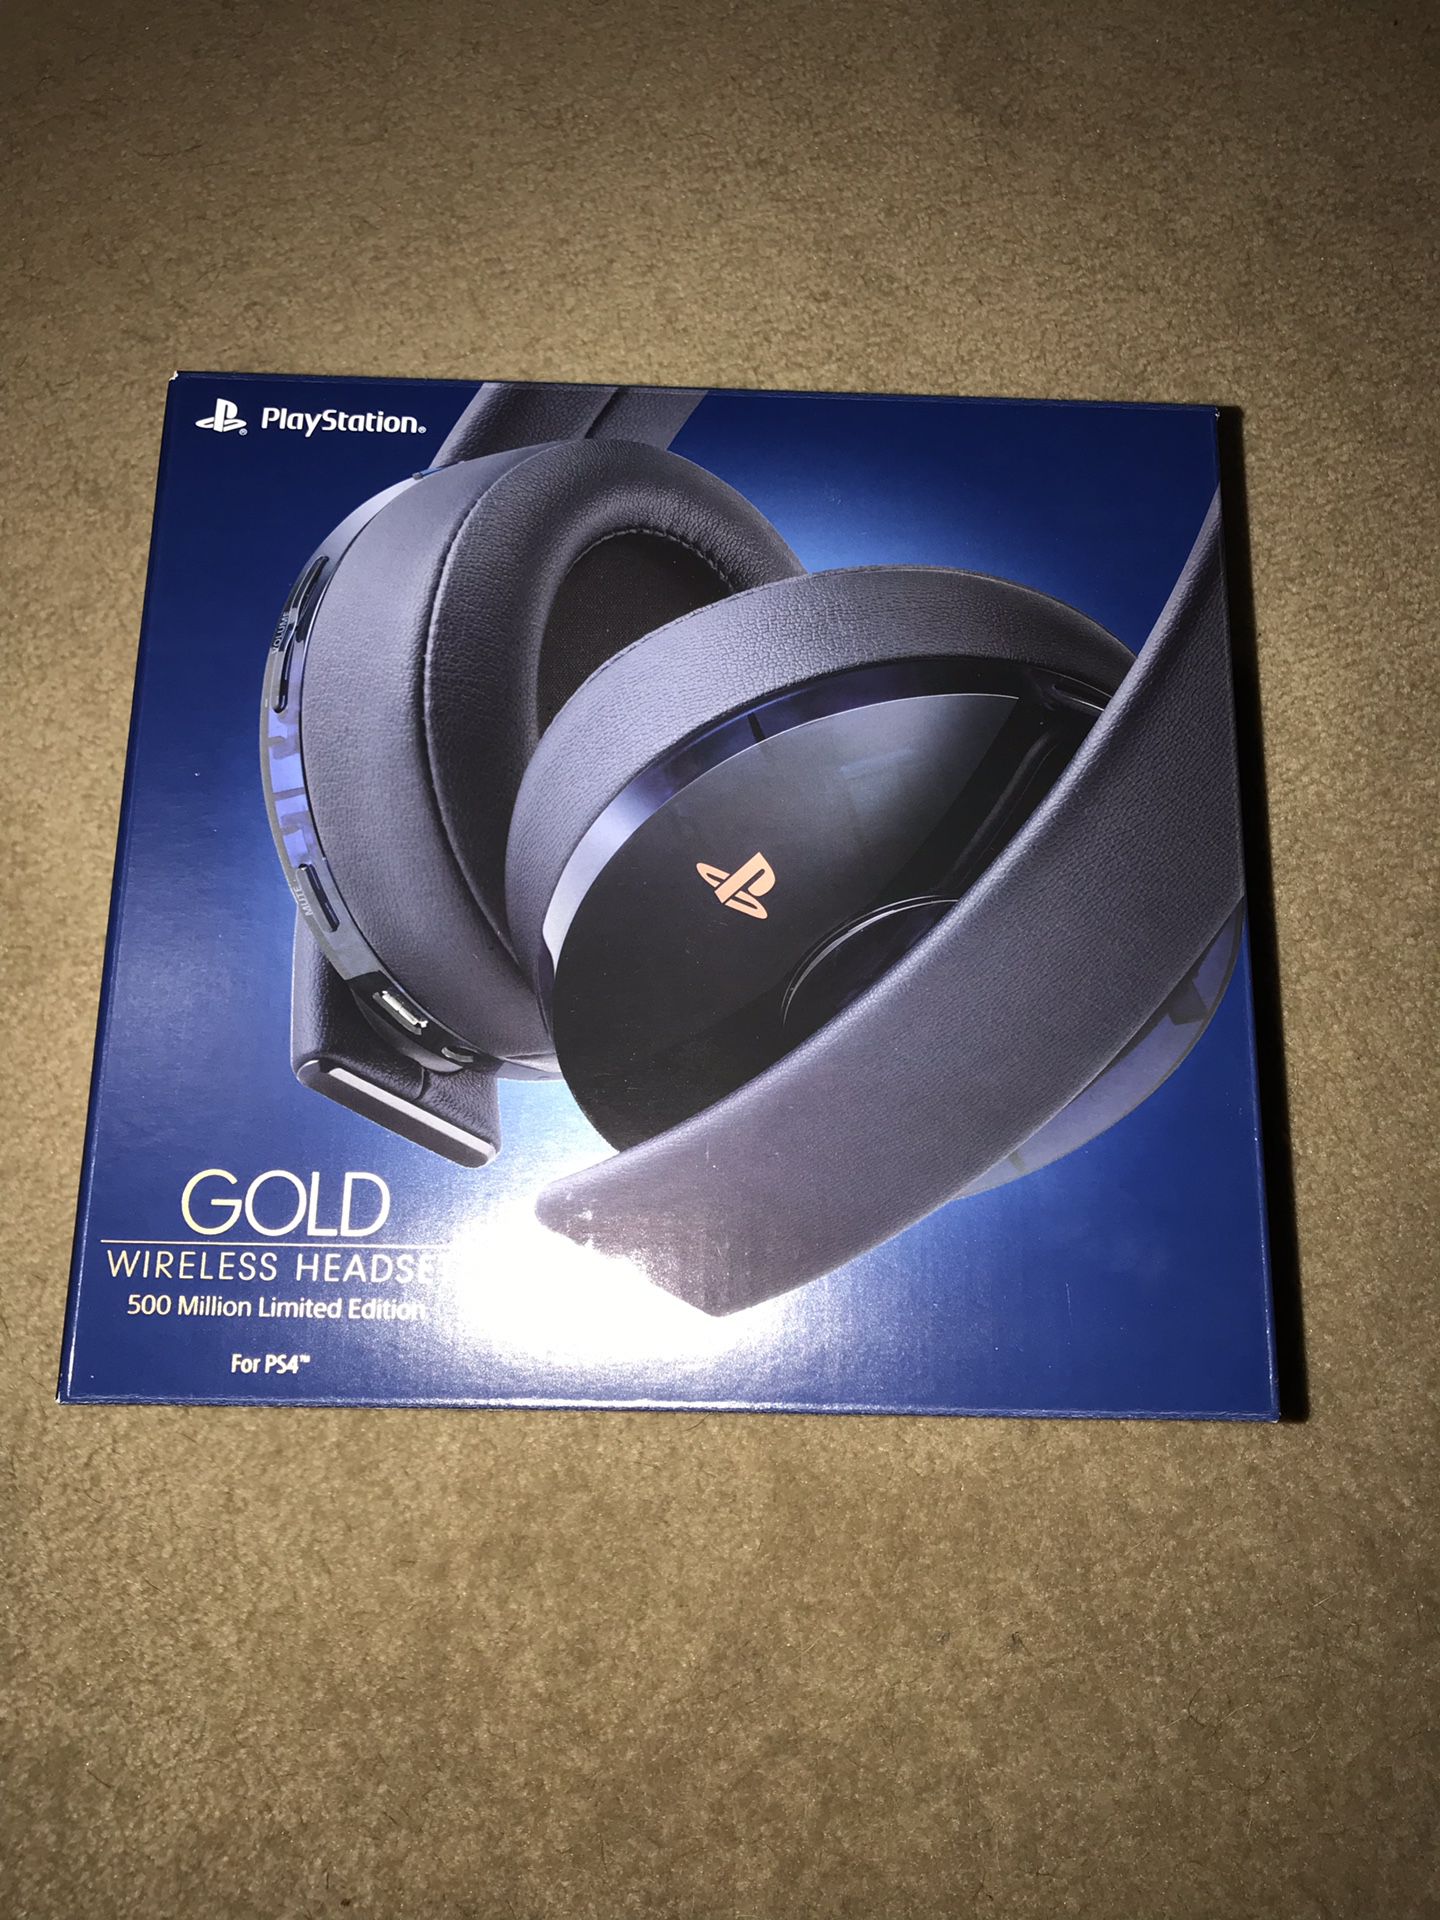 PlayStation Gold Wireless Headset 500 Million Limited Edition - PlayStation 4 [Discontinued]